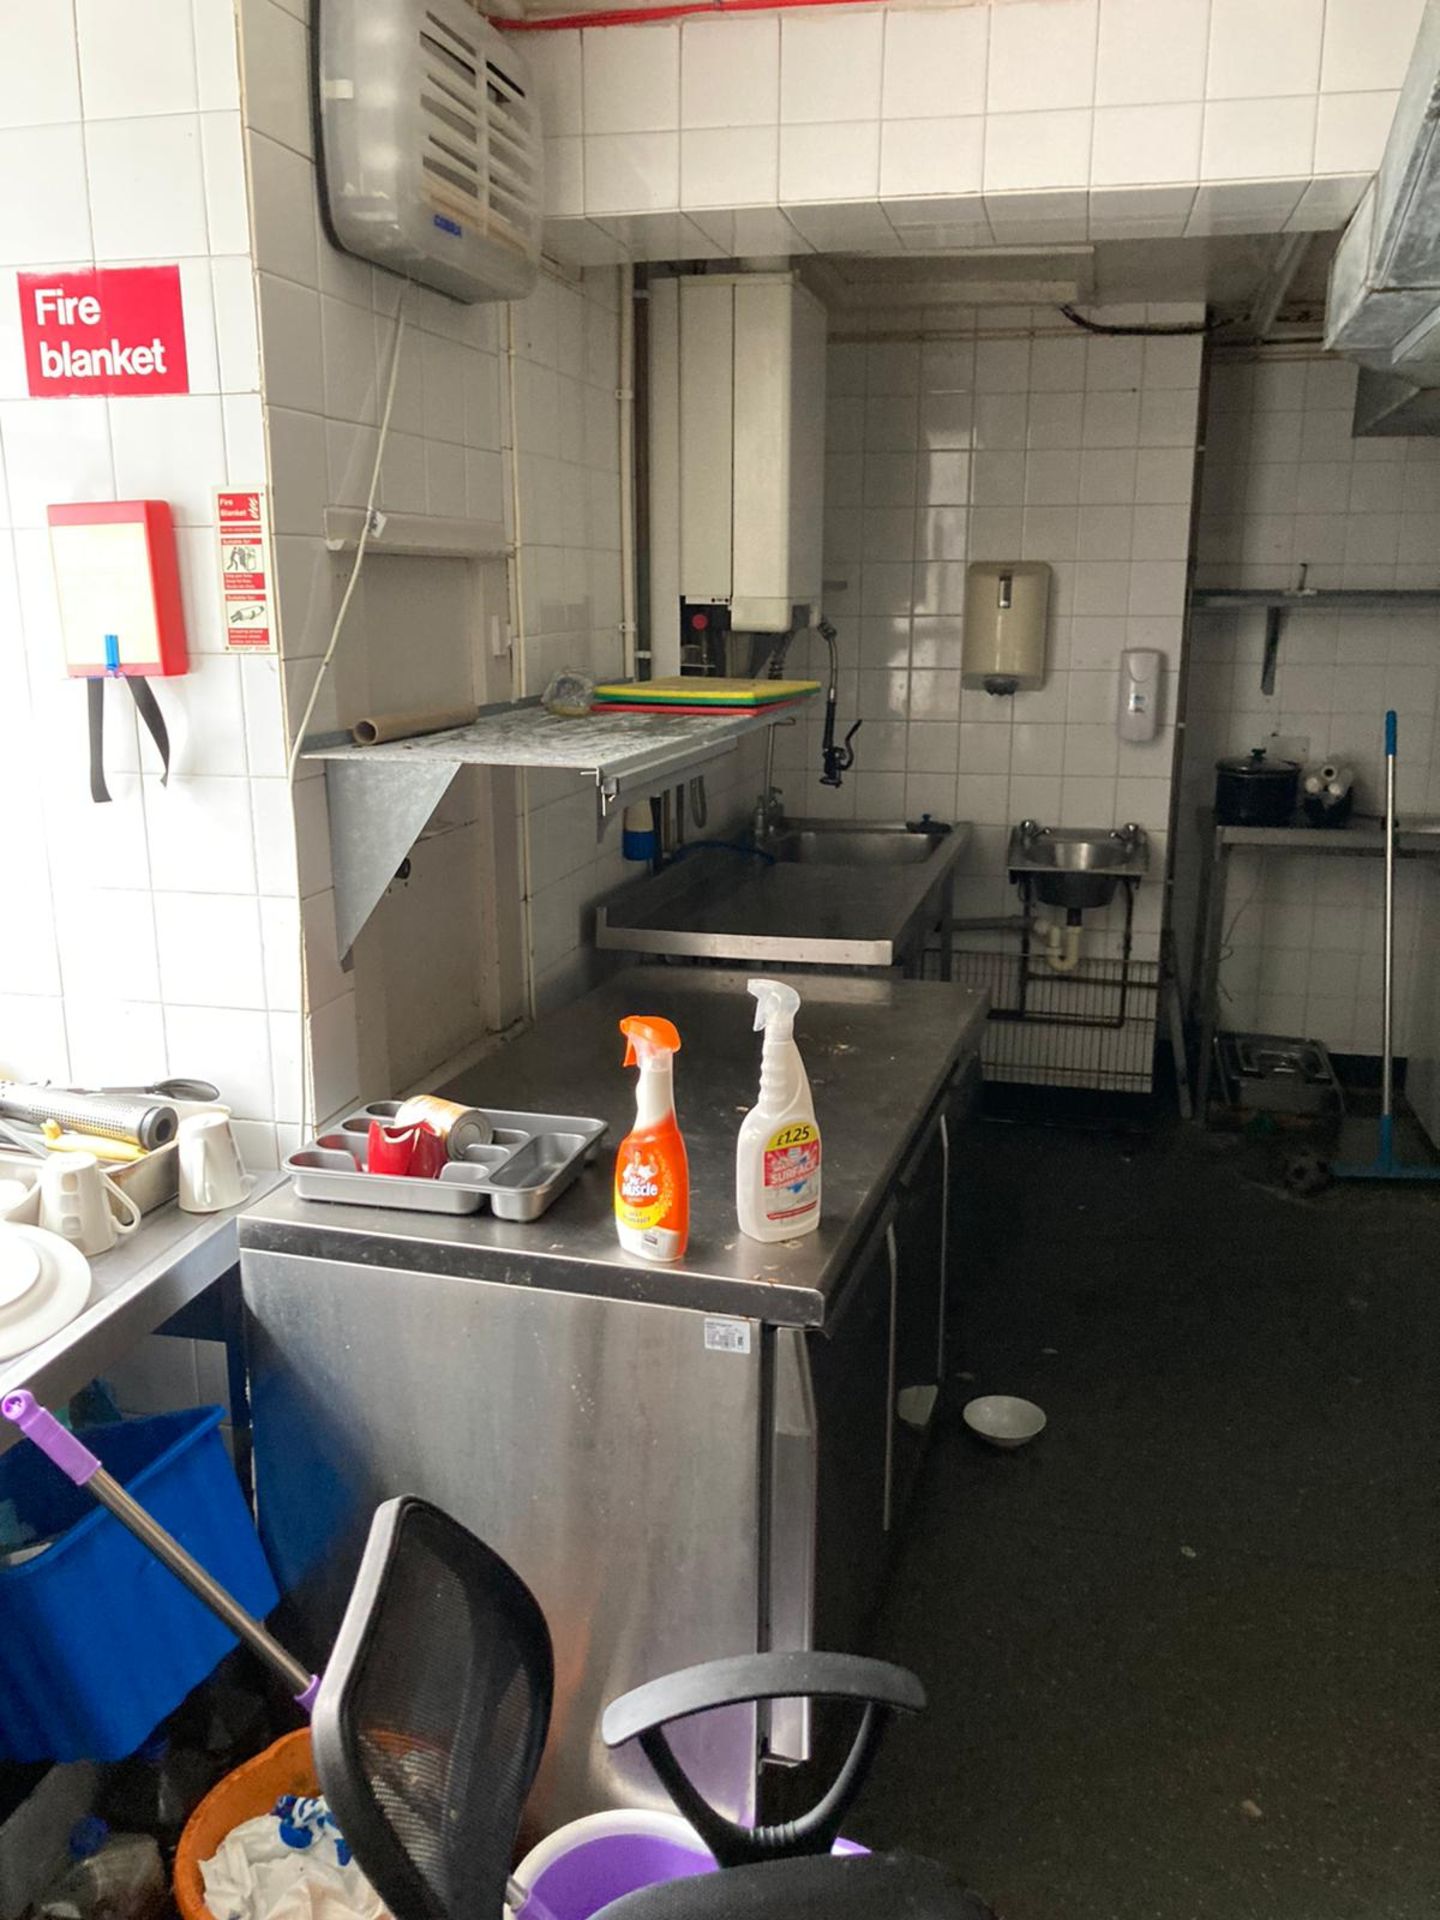 Contents of Commercial Kitchen - Image 2 of 2